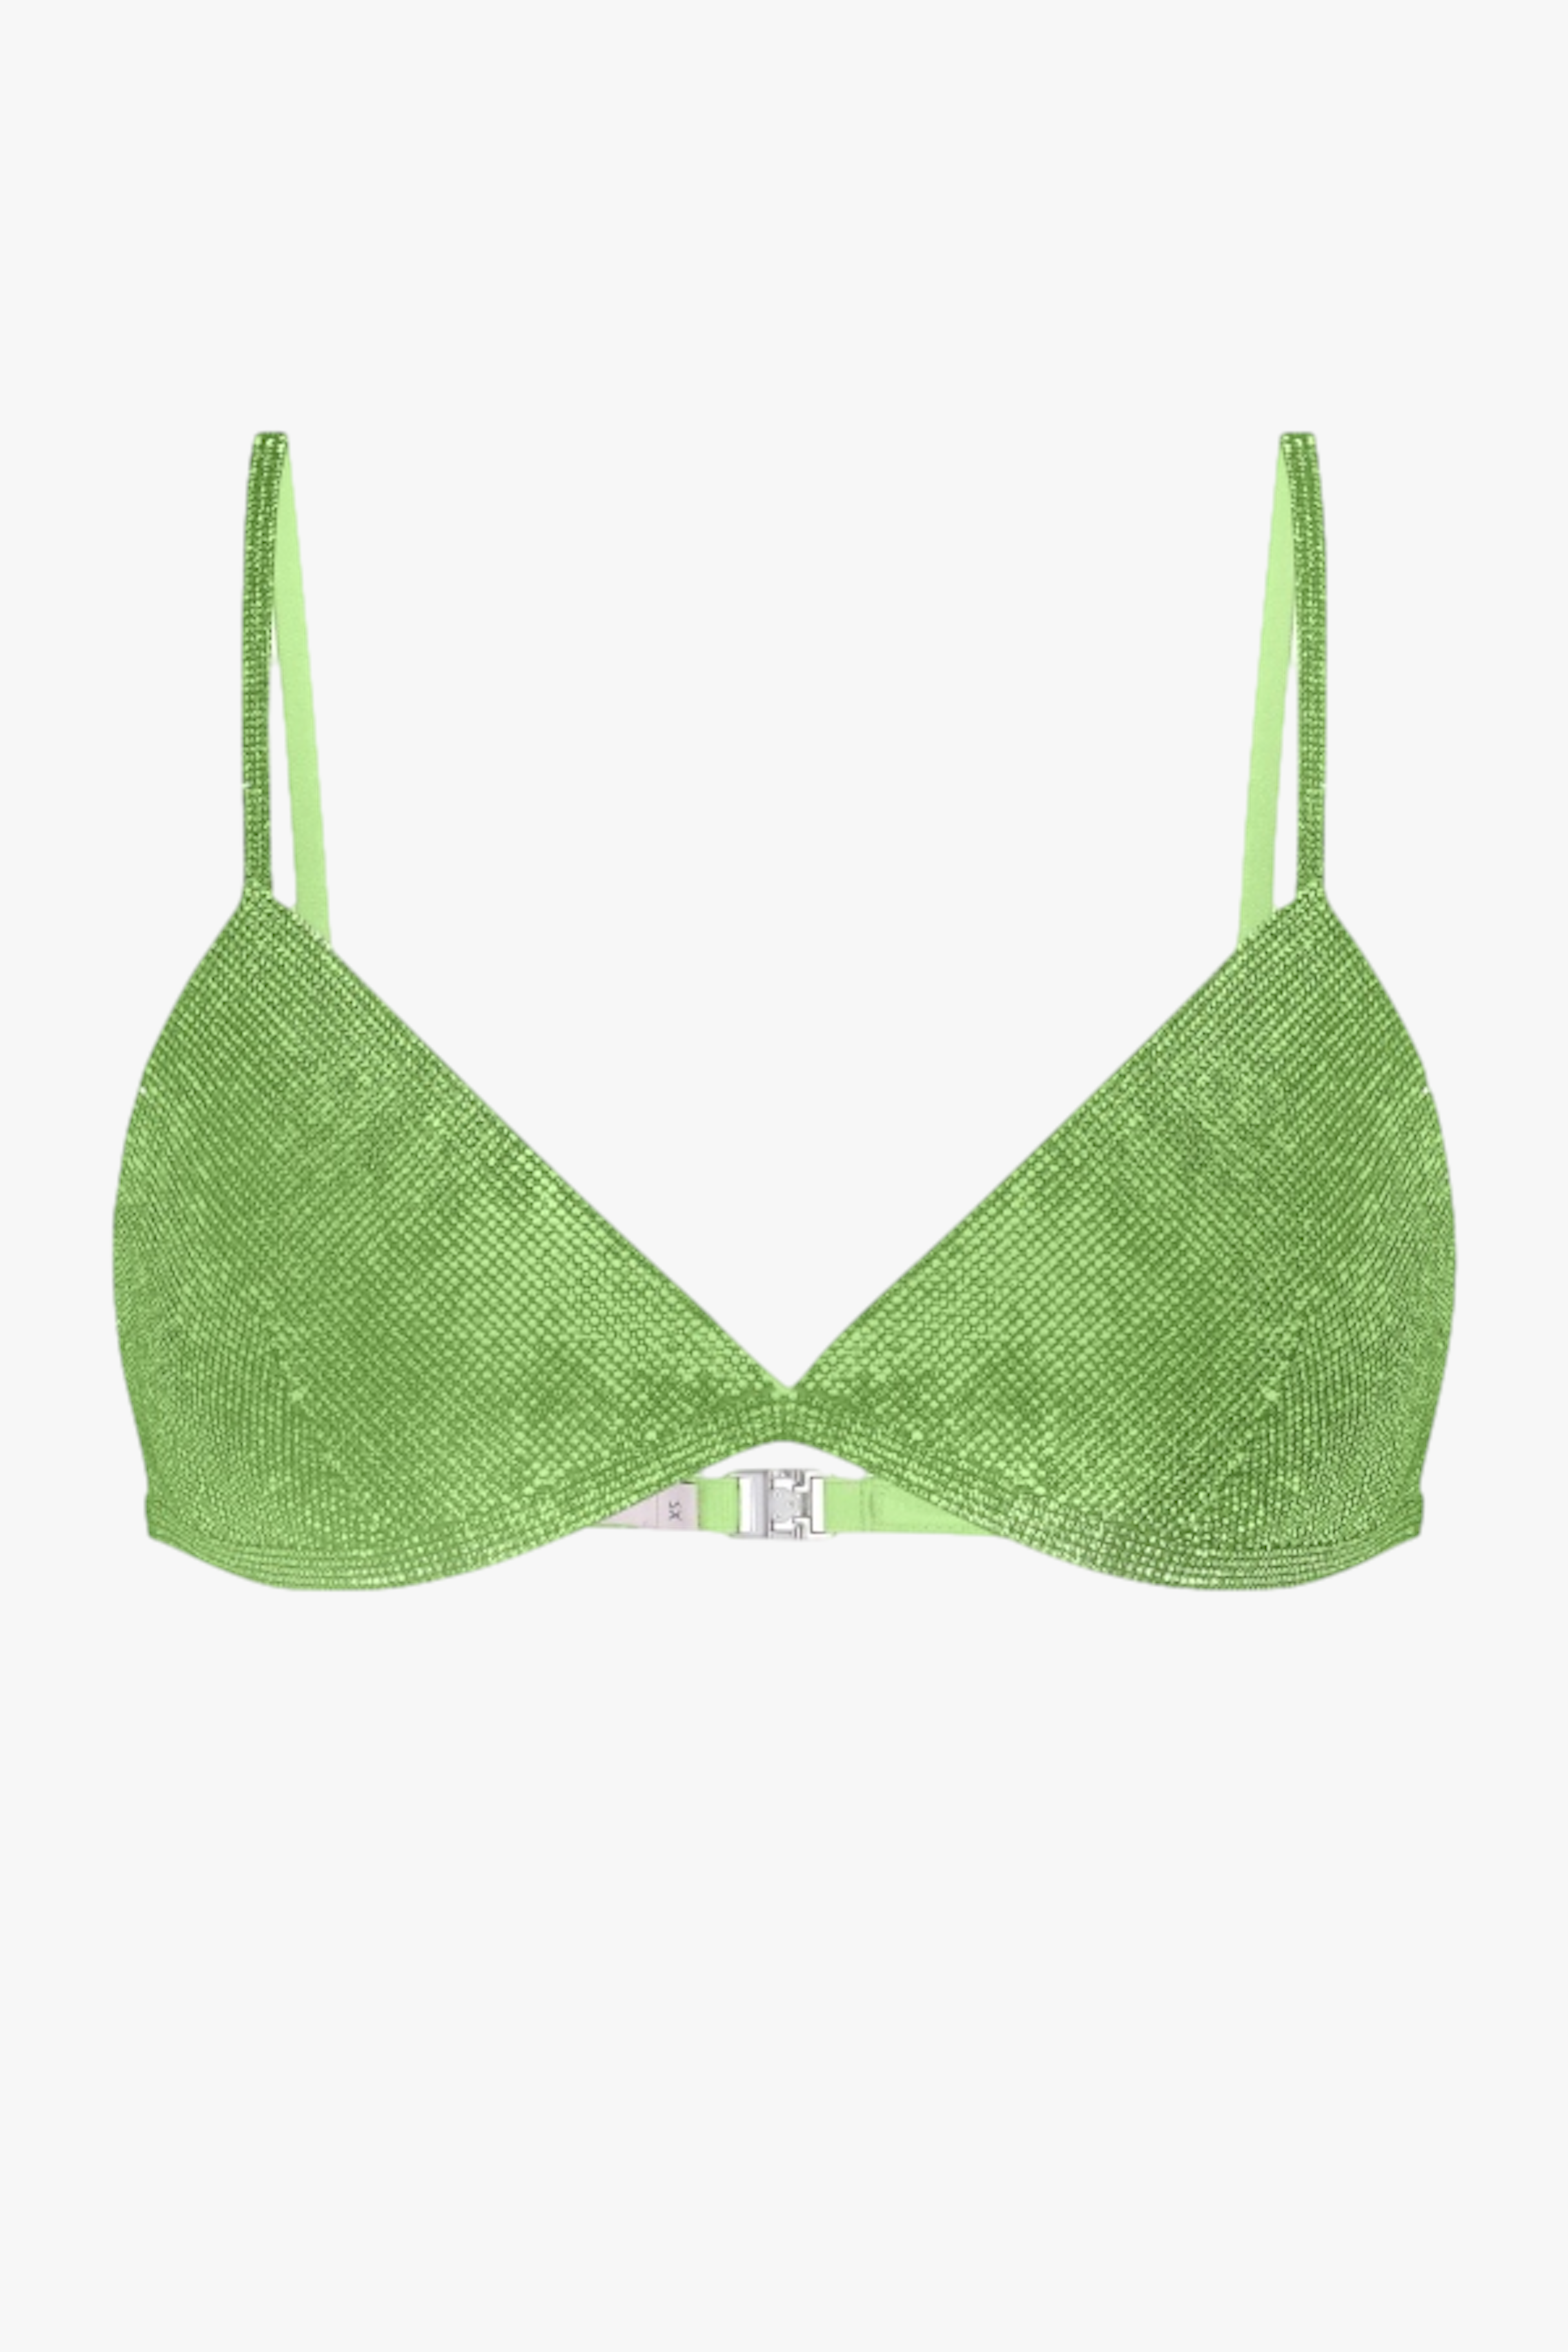 Shop TRIANGLE BRA LONG from NUÉ at Seezona